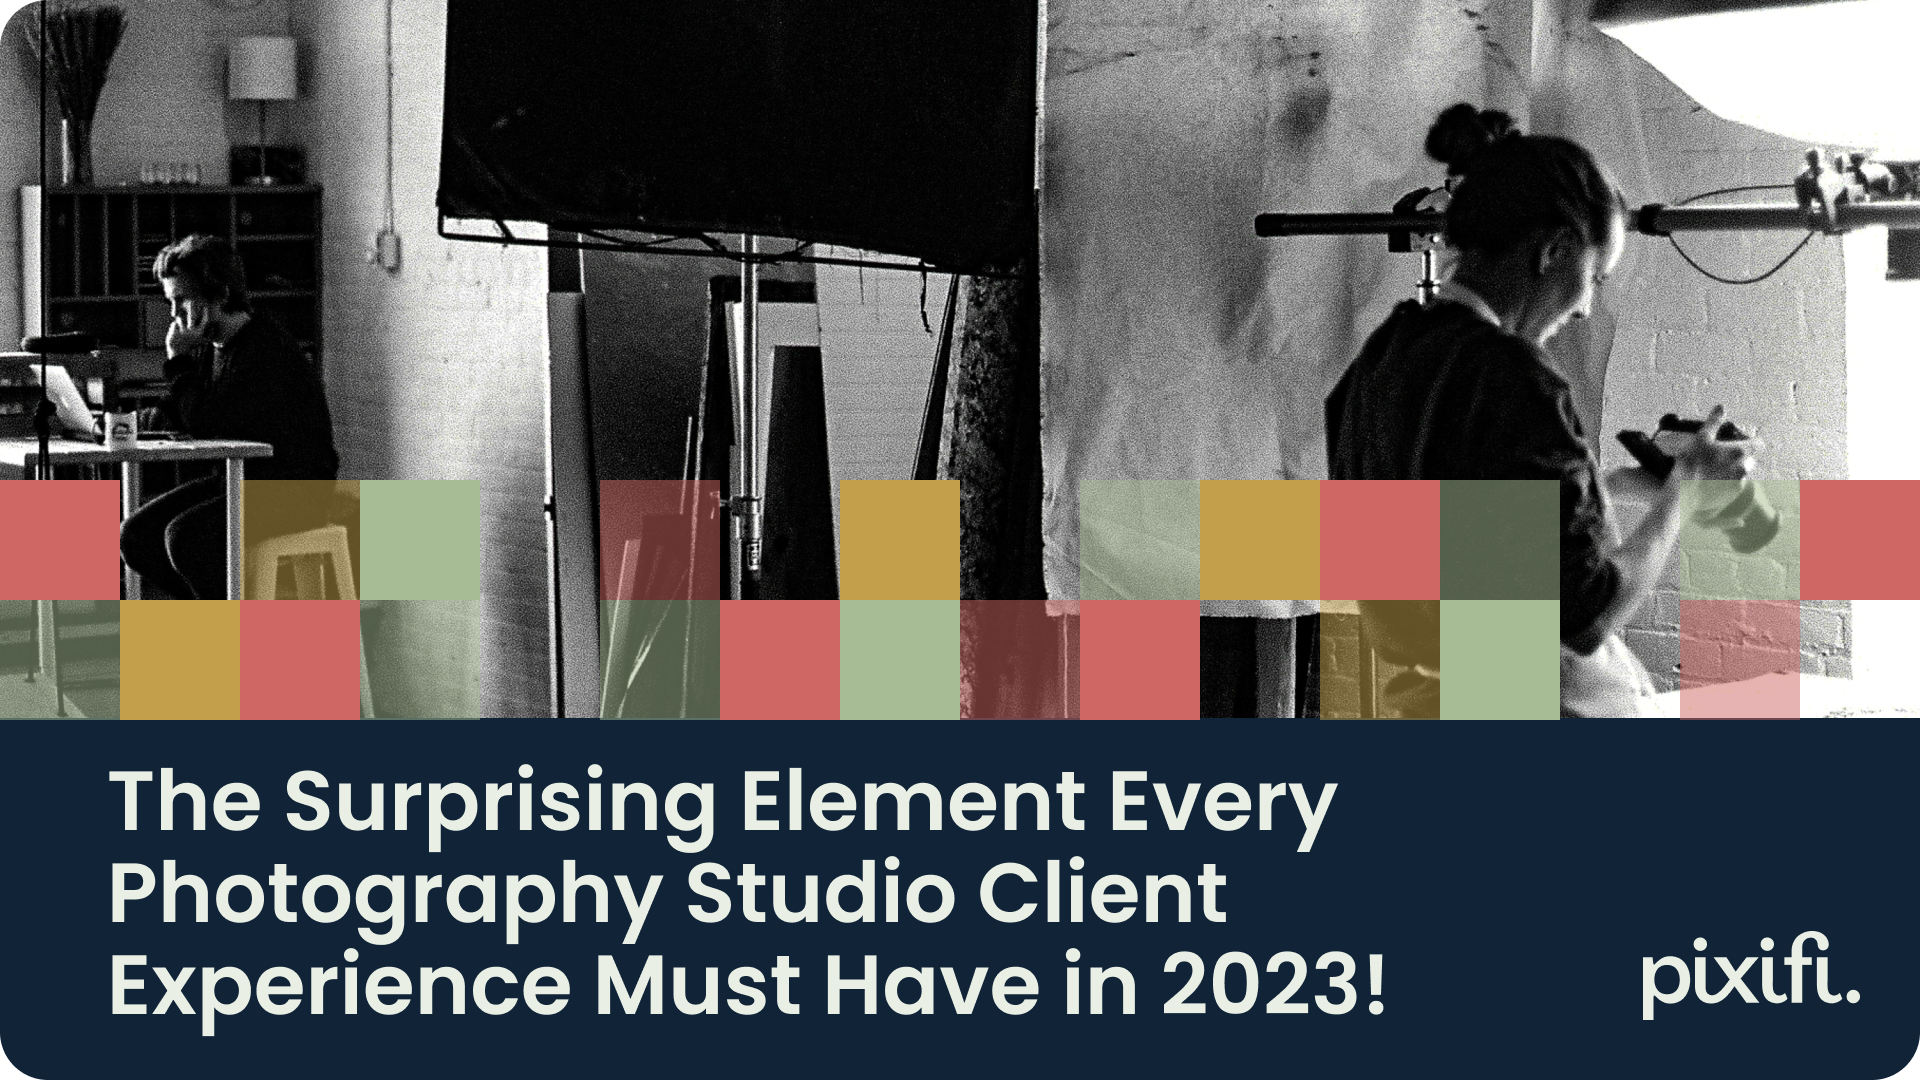 The Surprising Element Every Photography Studio Client Experience Must Have in 2023!